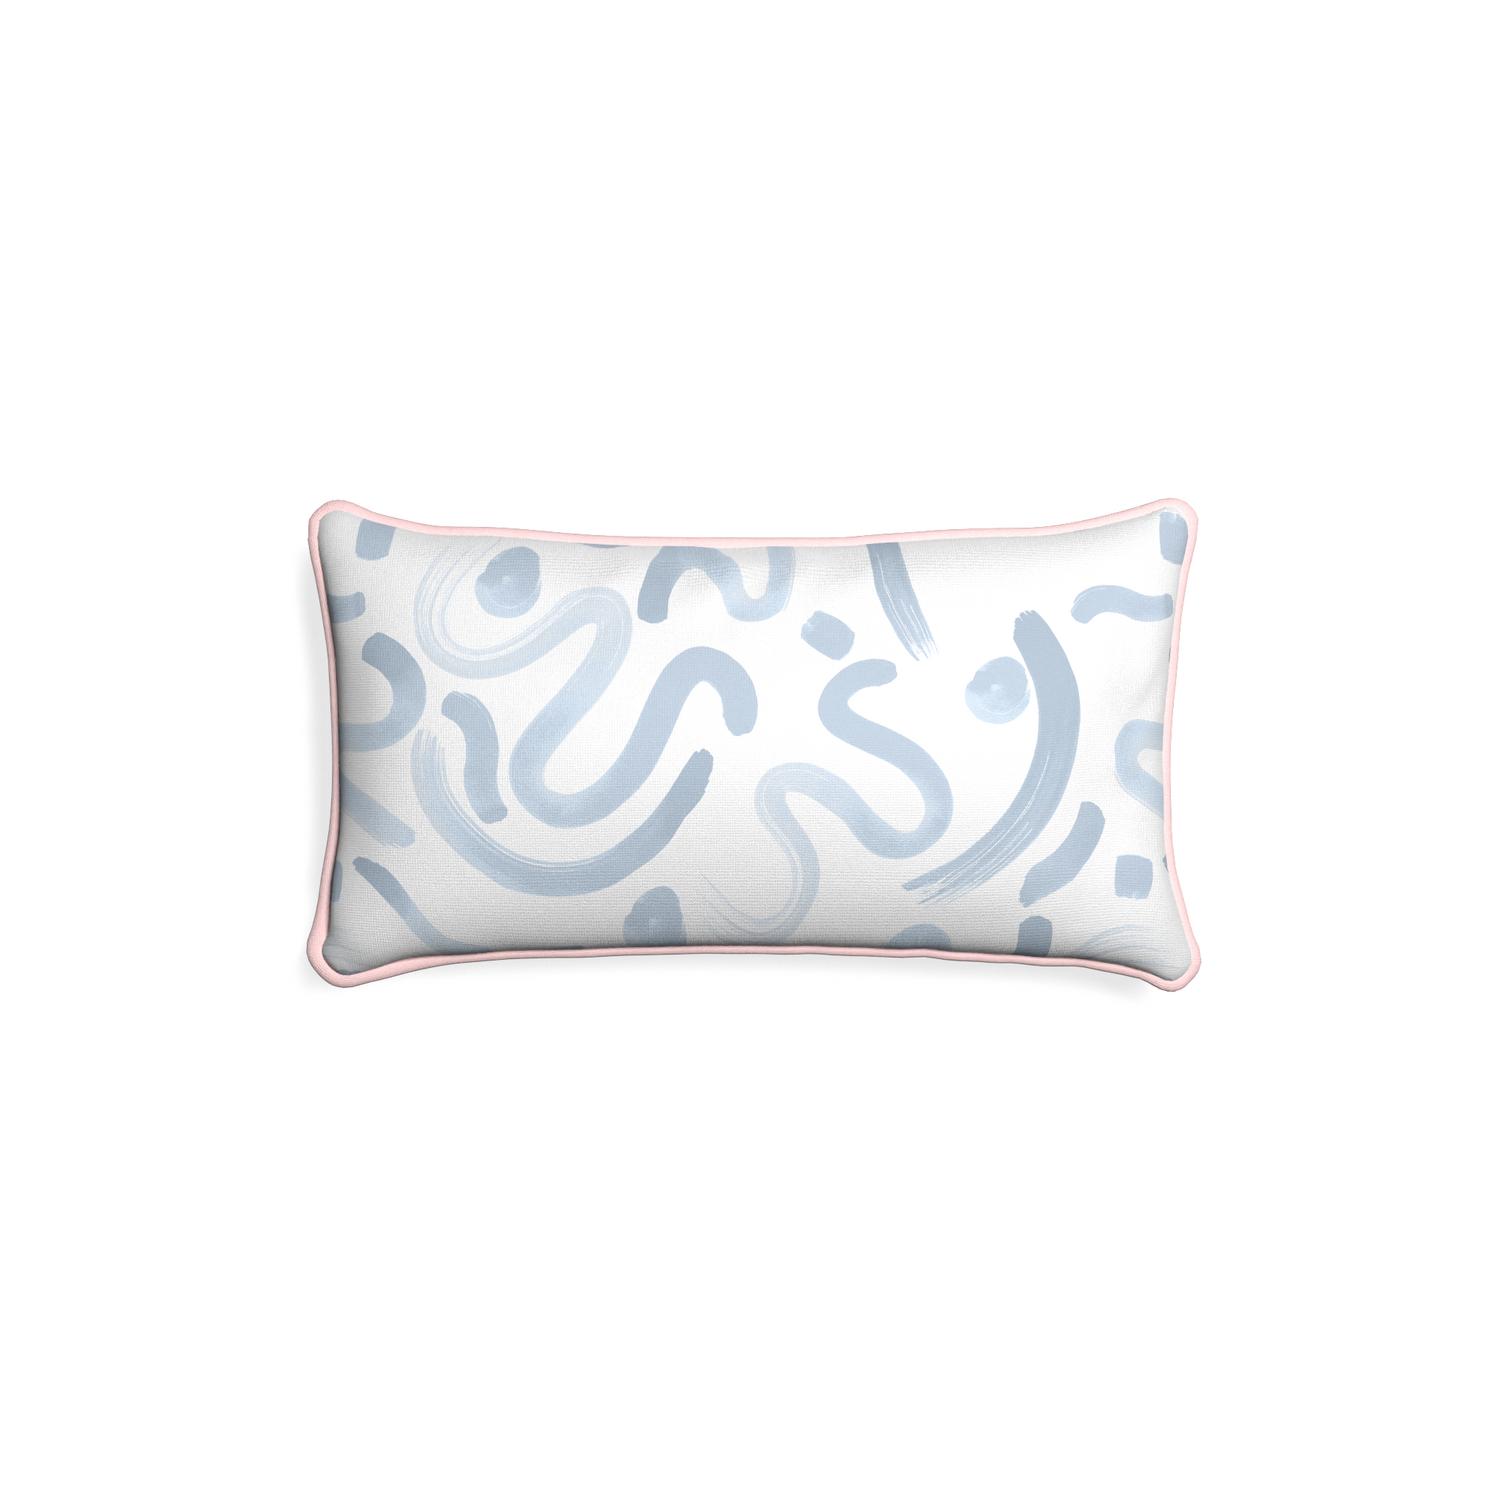 Petite-lumbar hockney sky custom abstract sky bluepillow with petal piping on white background